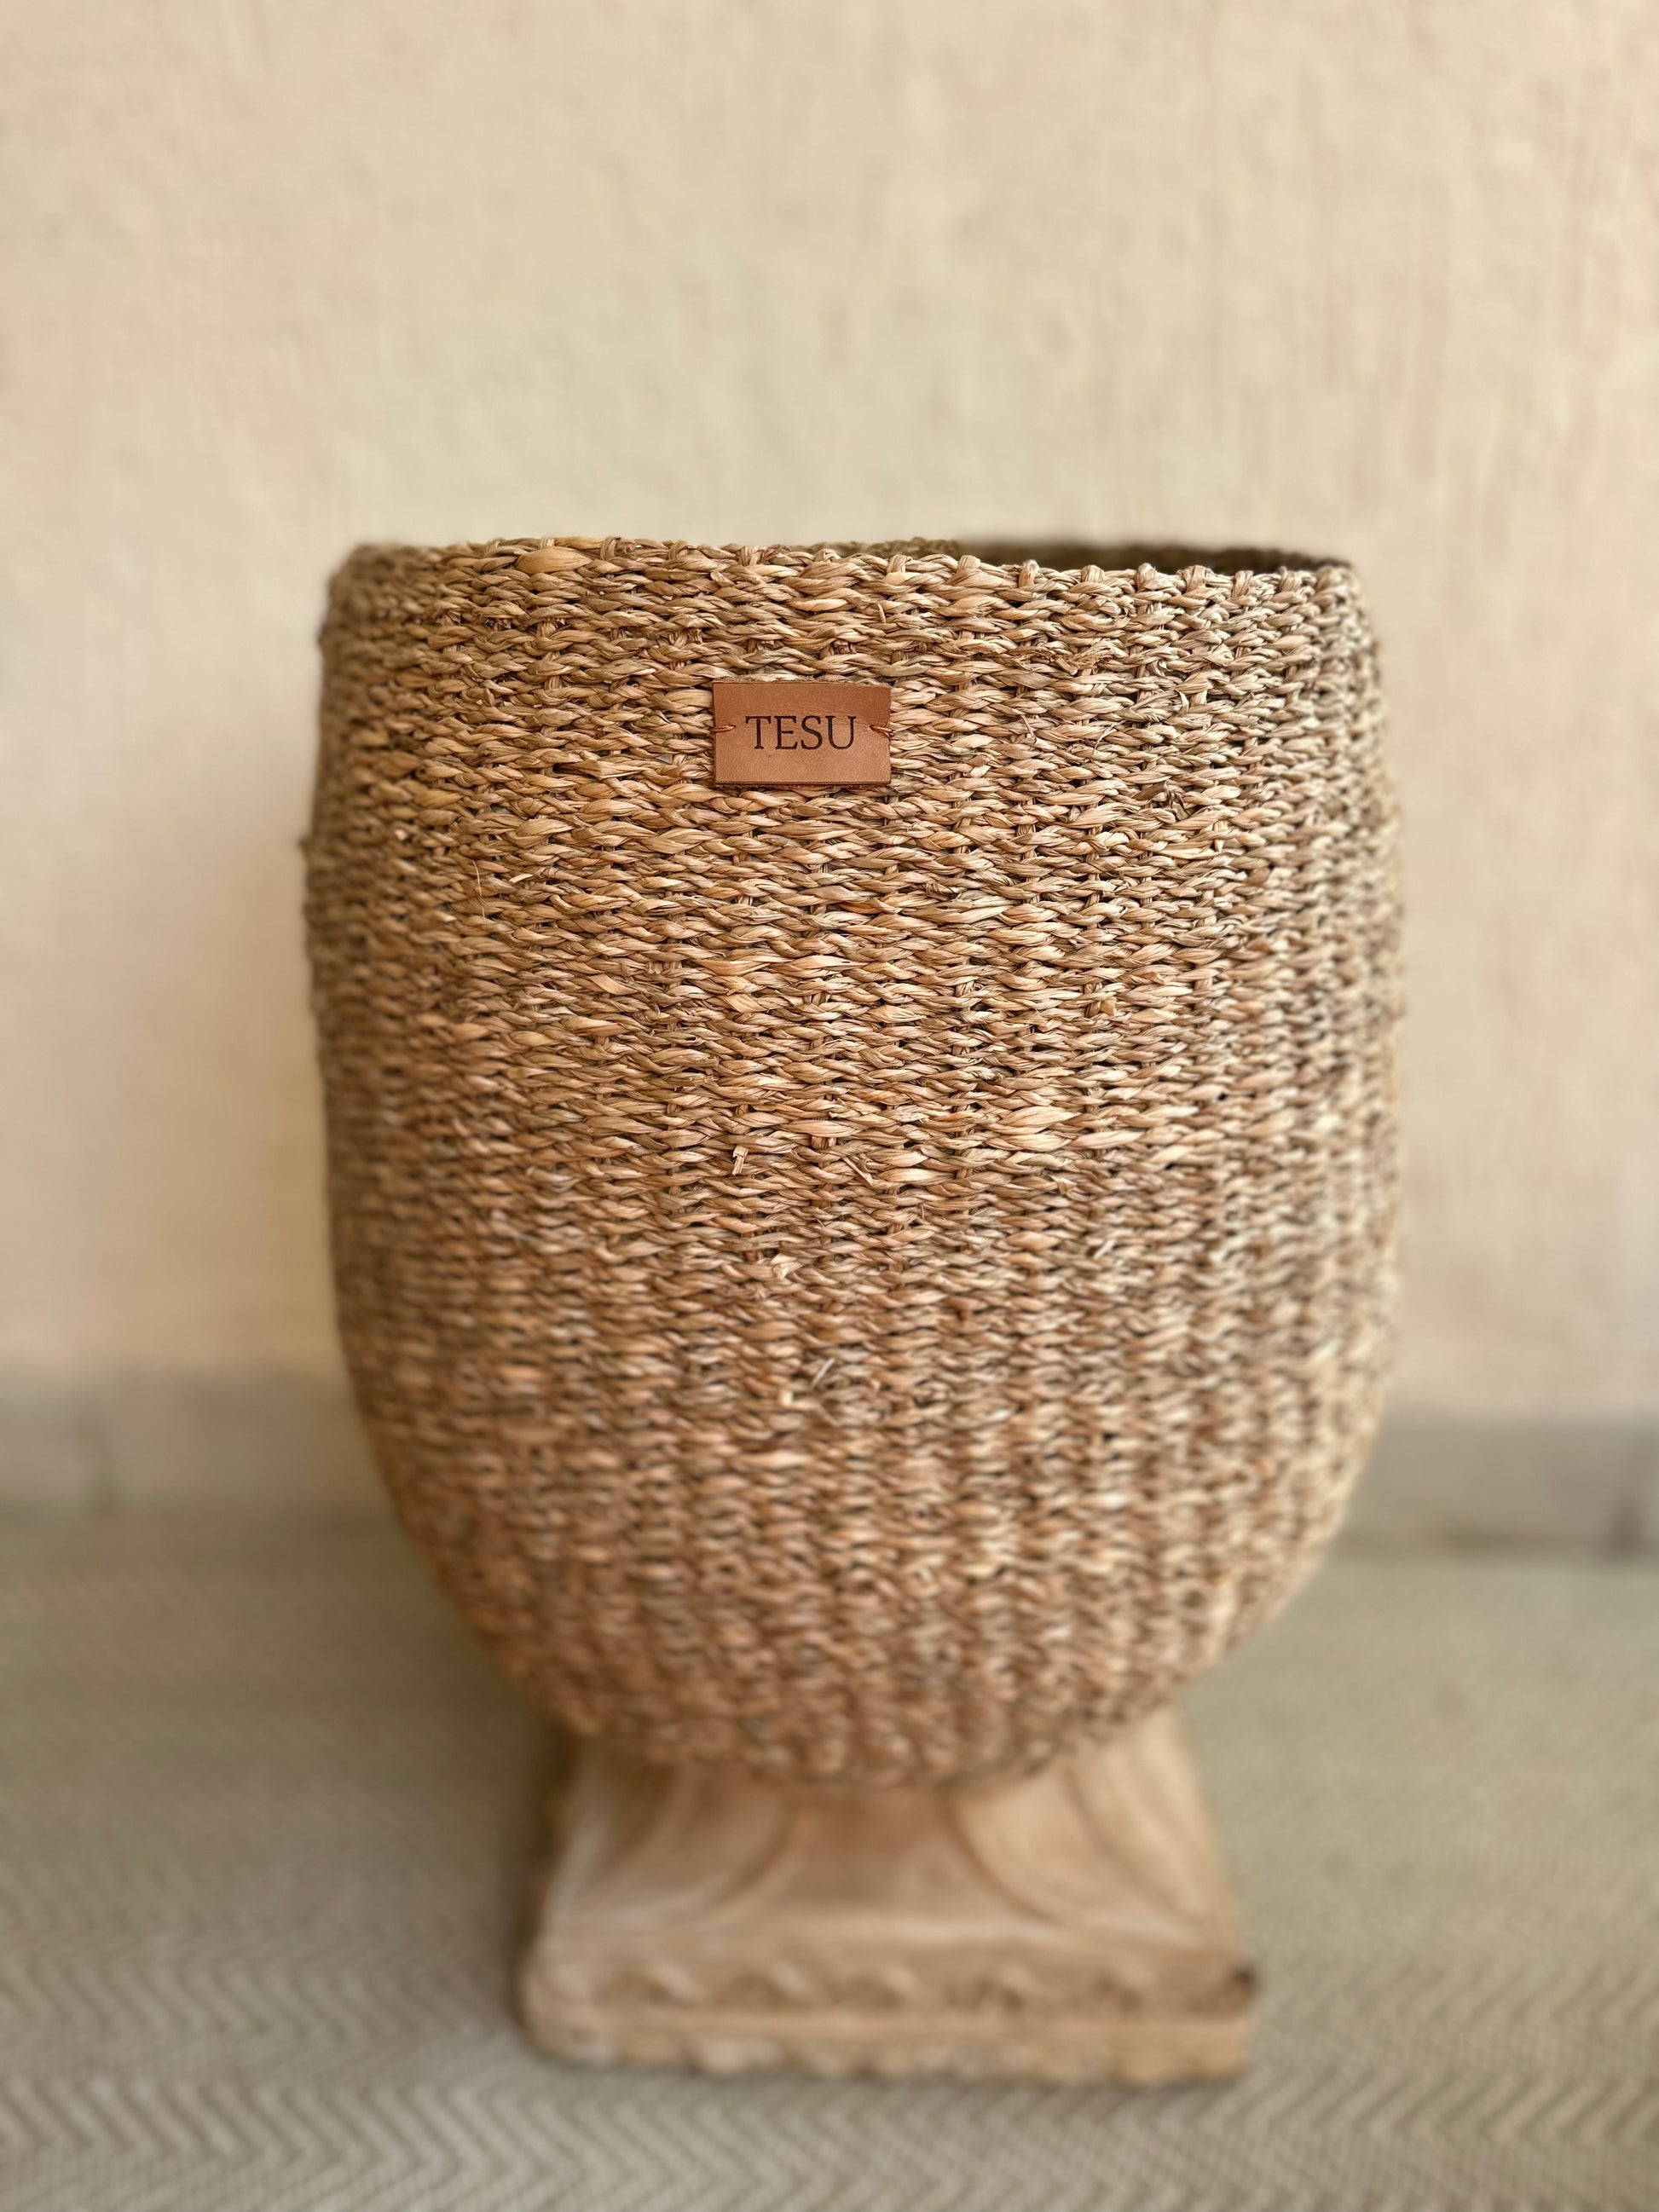 Enhance your Dream Home with our curated selection of premium Home Décor items. Seagrass Plant Holder are Perfect for decorating your home, living room decor, bedroom interior touches, beautiful cover pots and much more. Its placement is very flexible which is suitable for beautifying your room. Hand-woven by our artisans from sustainable Sea grass these storage baskets are great for storing and have high aesthetic appeal. tesu 